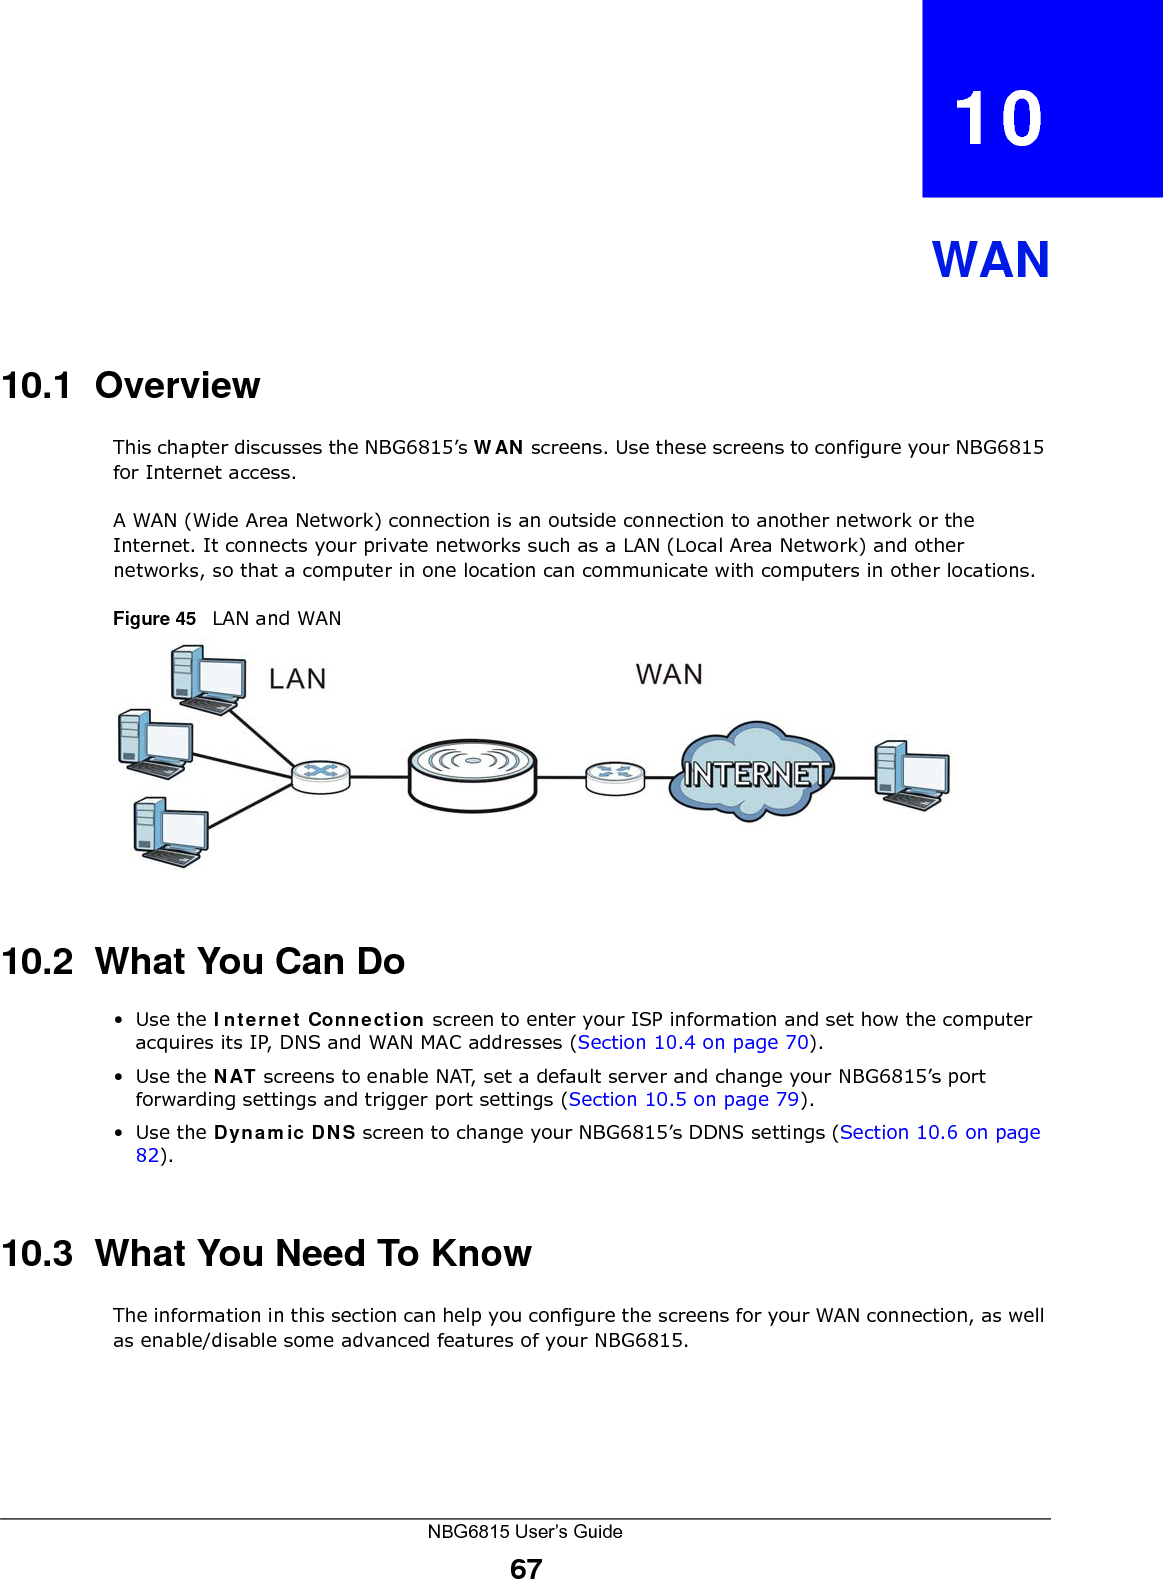 NBG6815 User’s Guide67CHAPTER   10WAN10.1  OverviewThis chapter discusses the NBG6815’s WAN screens. Use these screens to configure your NBG6815 for Internet access.A WAN (Wide Area Network) connection is an outside connection to another network or the Internet. It connects your private networks such as a LAN (Local Area Network) and other networks, so that a computer in one location can communicate with computers in other locations.Figure 45   LAN and WAN10.2  What You Can Do•Use the Internet Connection screen to enter your ISP information and set how the computer acquires its IP, DNS and WAN MAC addresses (Section 10.4 on page 70).•Use the NAT screens to enable NAT, set a default server and change your NBG6815’s port forwarding settings and trigger port settings (Section 10.5 on page 79).•Use the Dynamic DNS screen to change your NBG6815’s DDNS settings (Section 10.6 on page 82).10.3  What You Need To KnowThe information in this section can help you configure the screens for your WAN connection, as well as enable/disable some advanced features of your NBG6815.